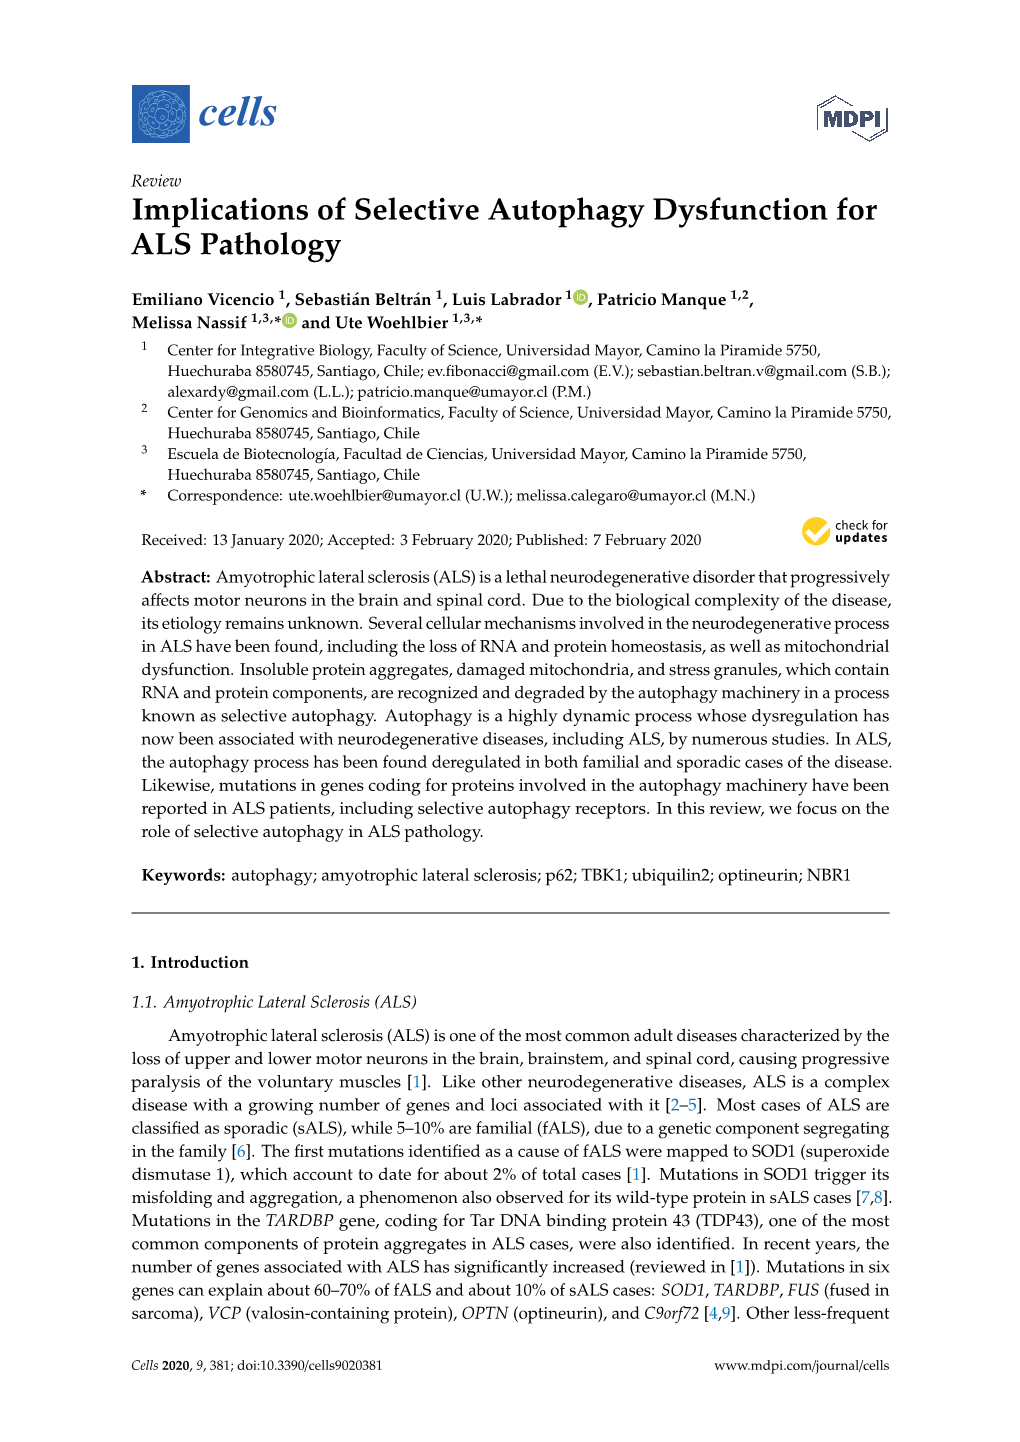 Implications of Selective Autophagy Dysfunction for ALS Pathology